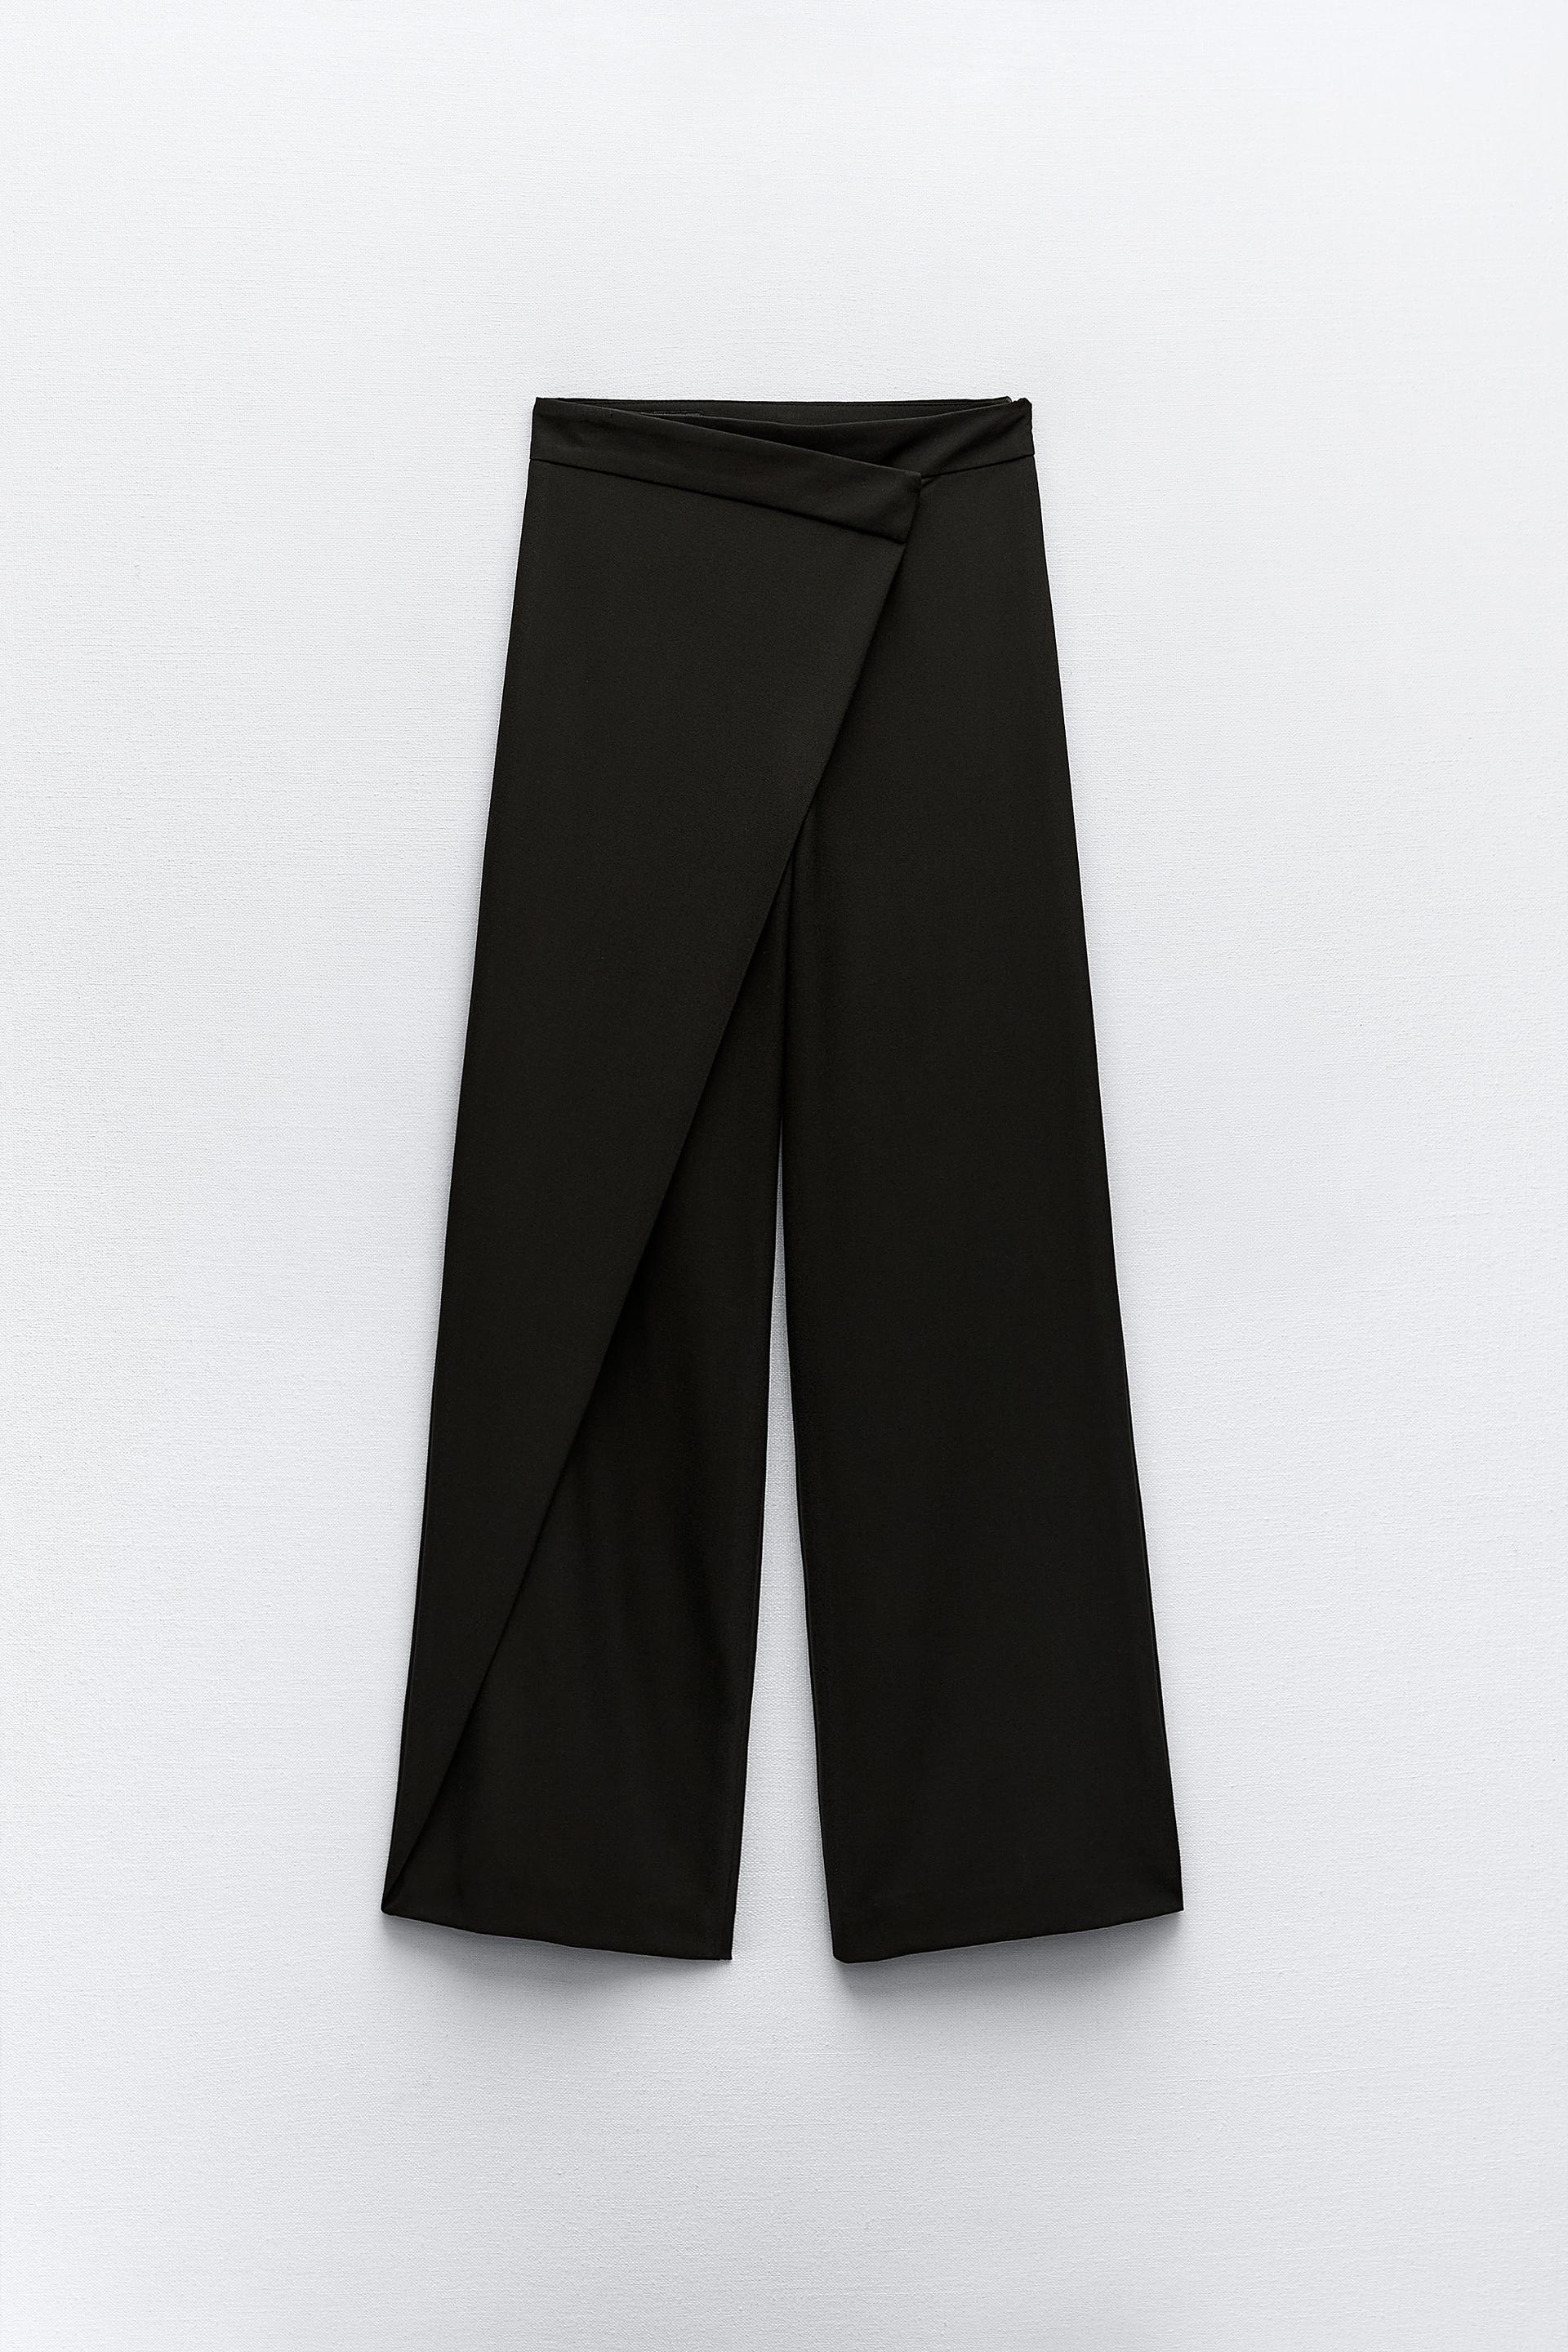 Zara, Pants & Jumpsuits, Zara Gold Button Strap Pants In Small Taupe  Brown High Waisted Wide Leg